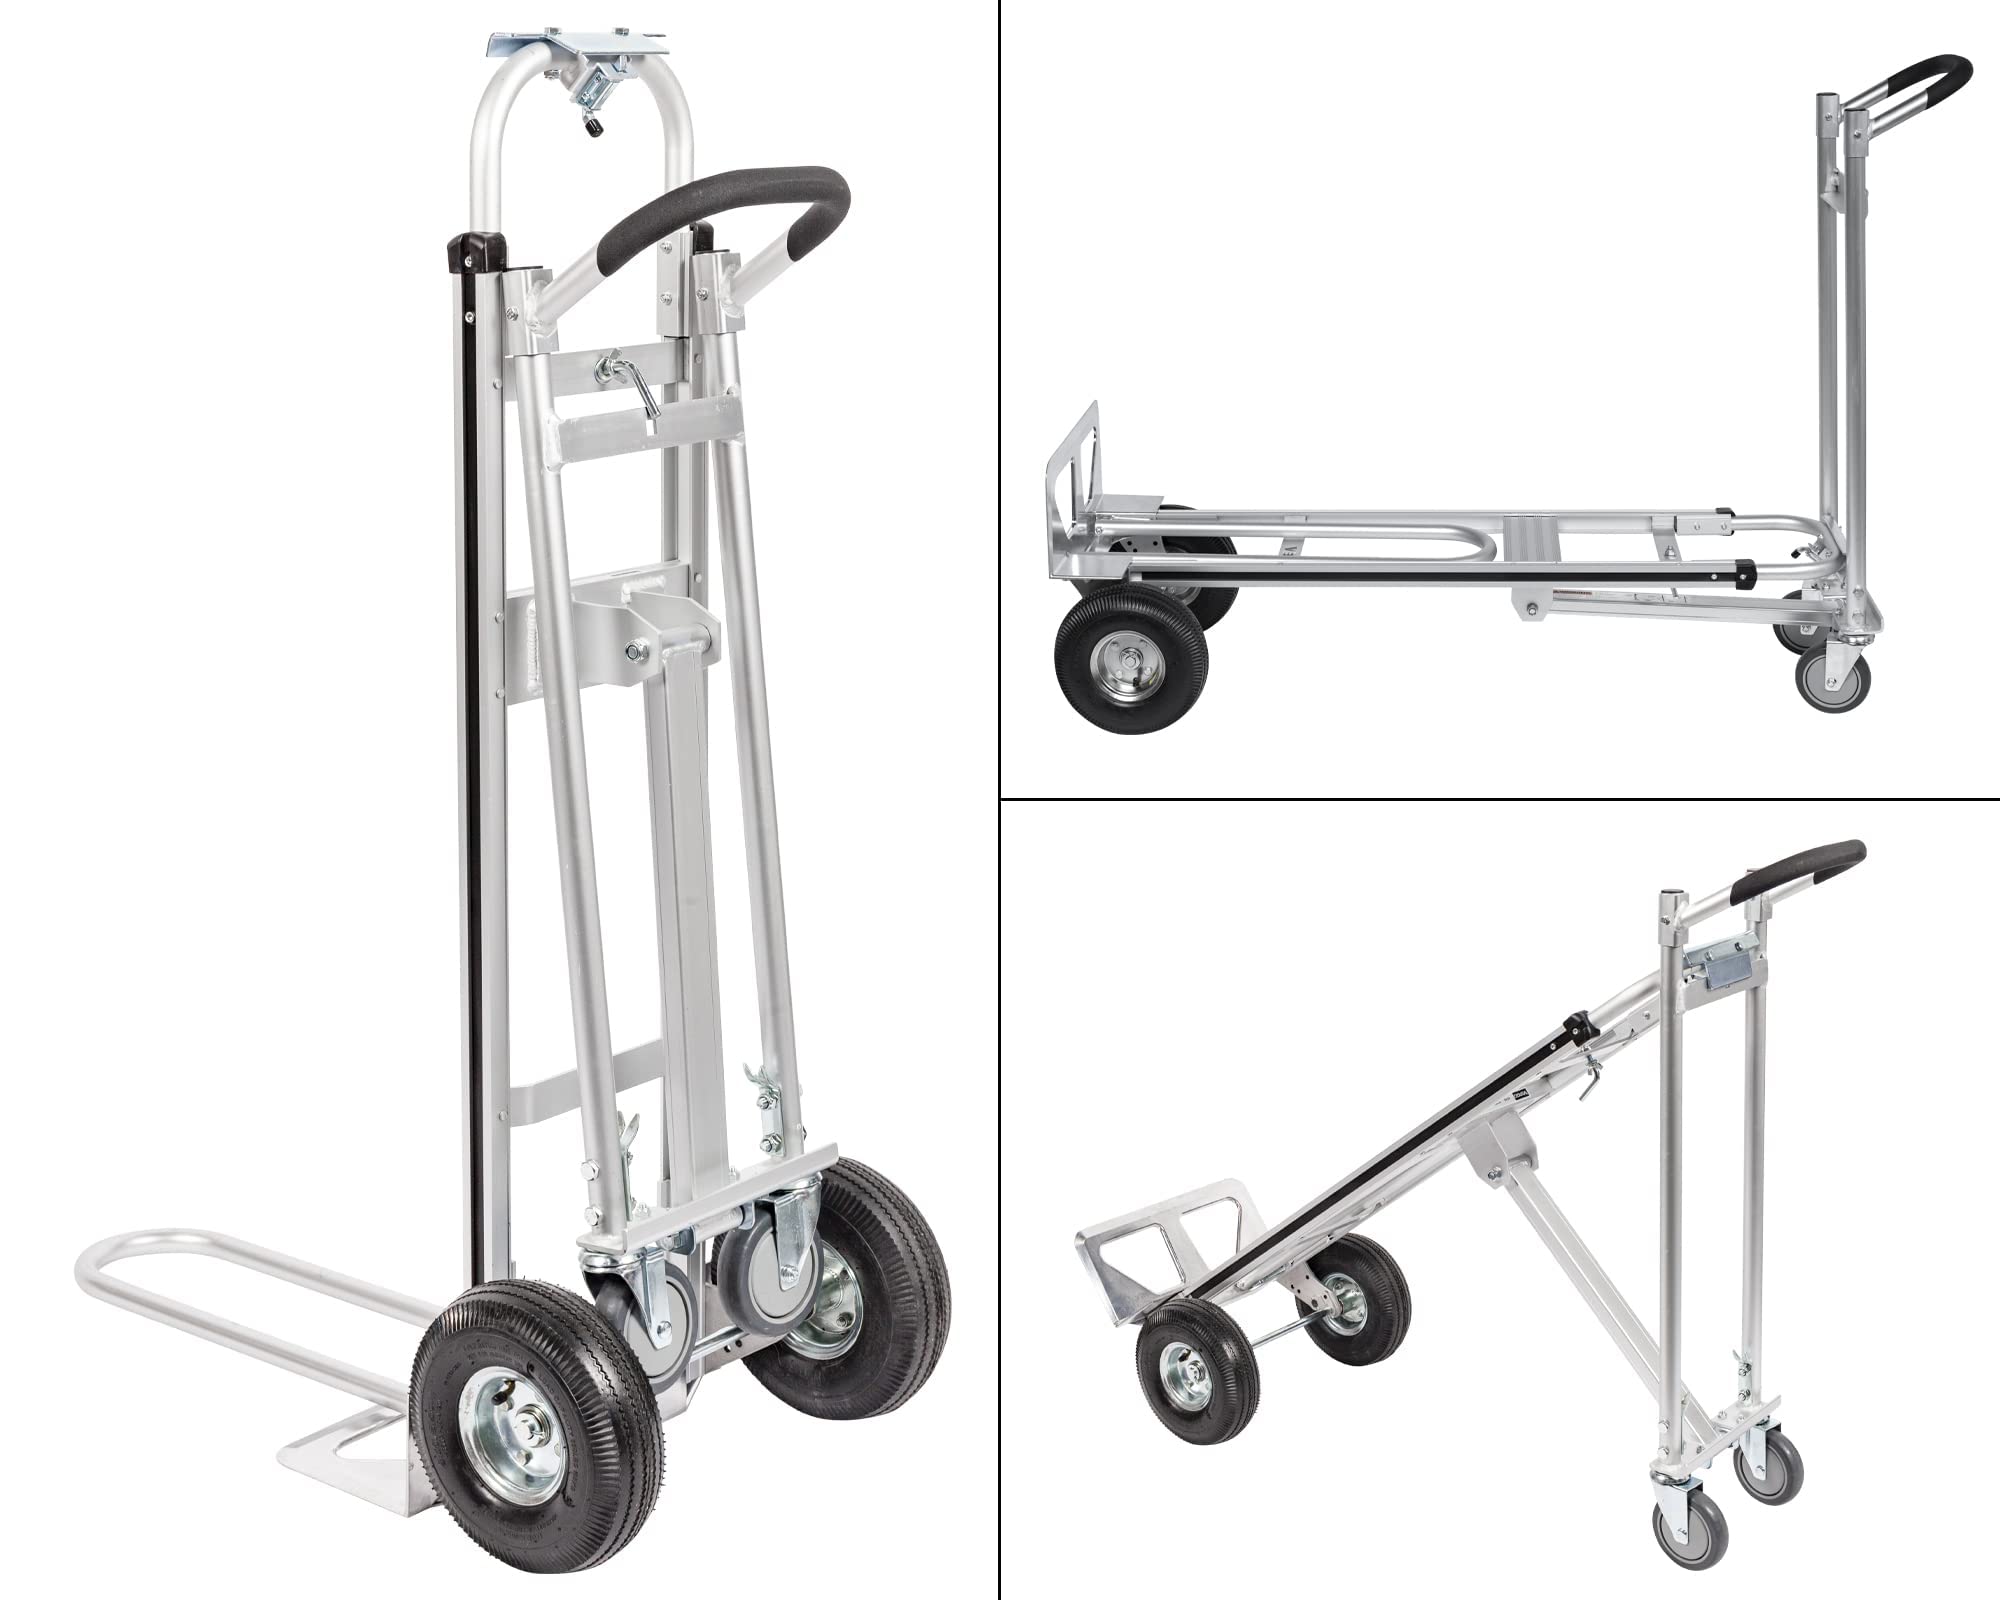 Vergo Industrial AS7A2 Aluminum Convertible Hand Truck Dolly Cart with Loop Handle 700 lbs Capacity (3 Positions, 53" High)